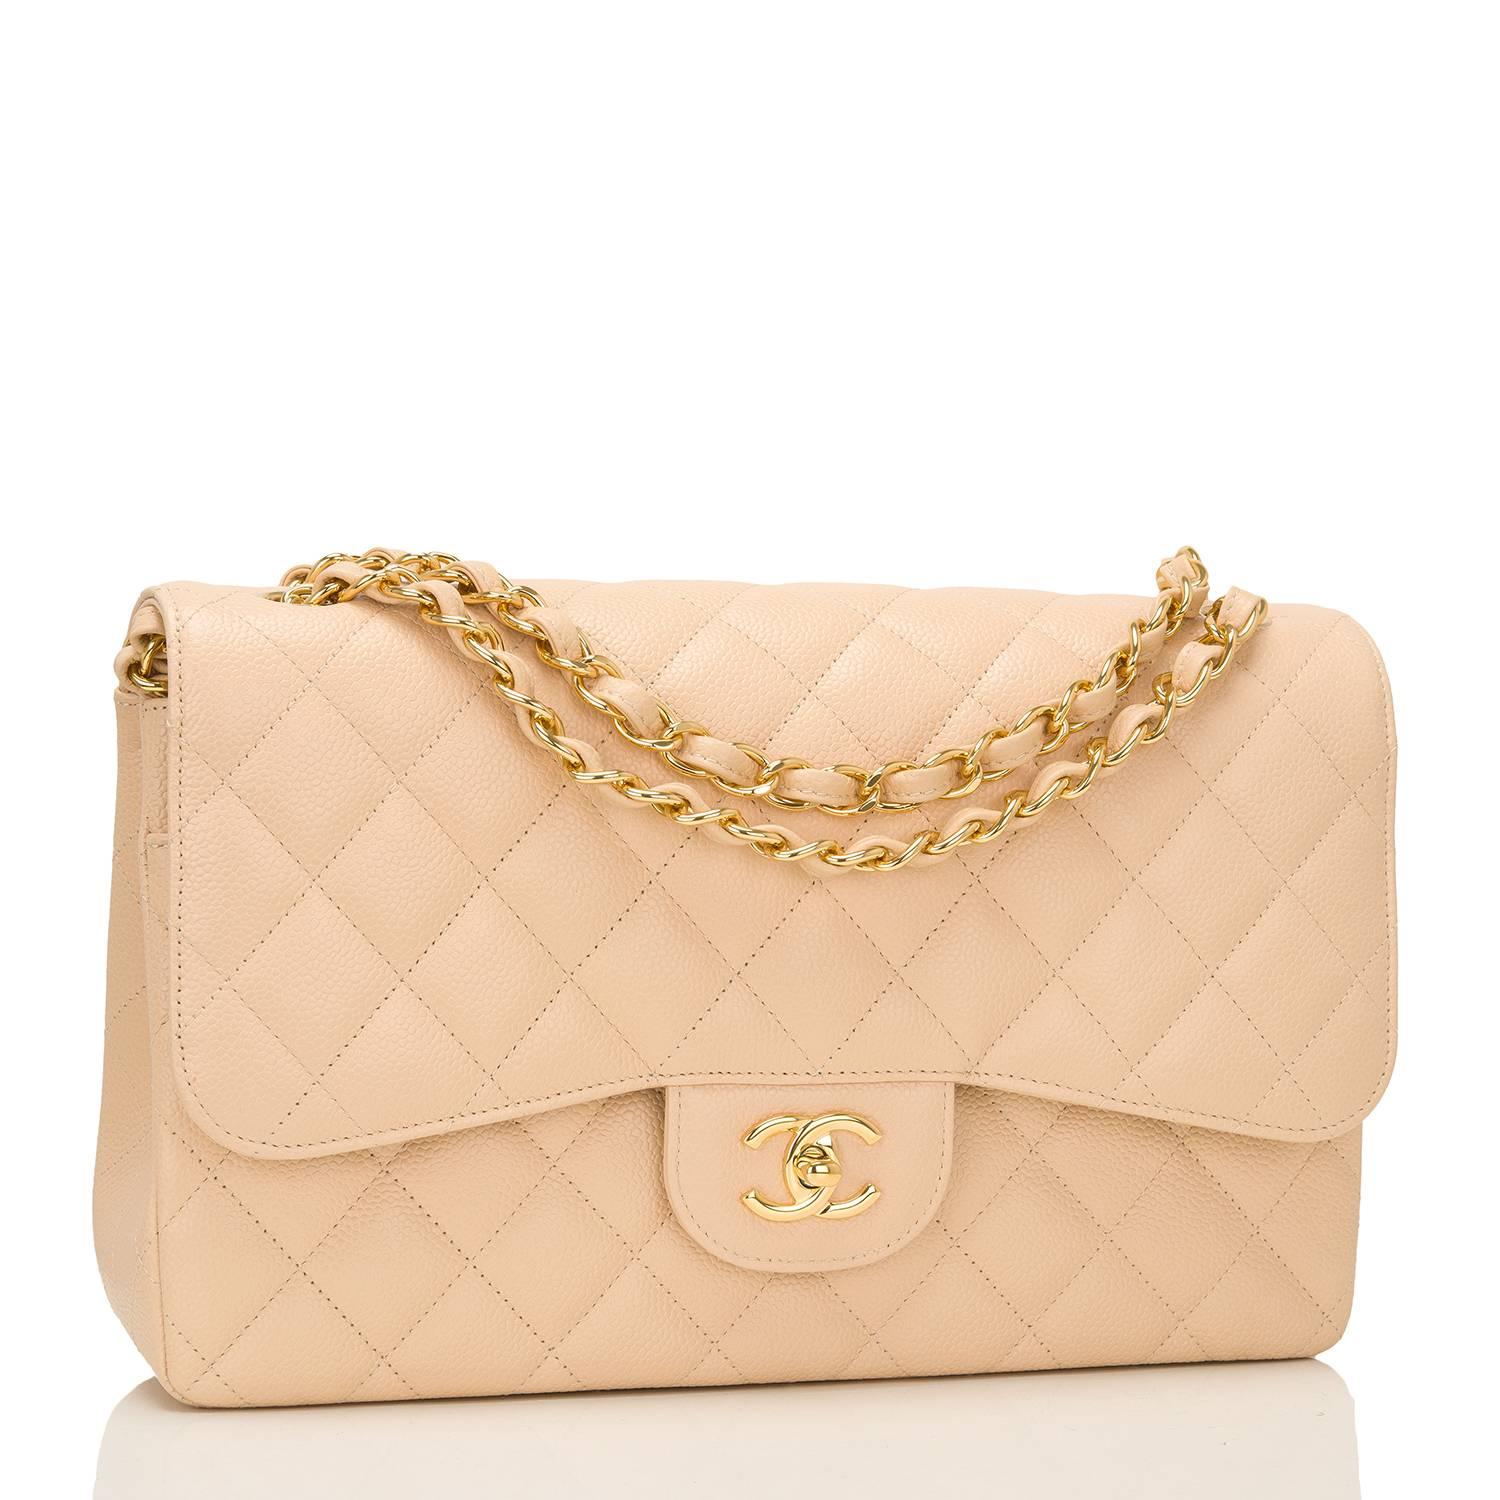 Chanel Jumbo Classic double flap bag of beige quilted caviar leather and accented with gold tone hardware.

The bag features a front flap with signature CC turnlock closure, a half moon back pocket, and an adjustable interwoven gold tone chain